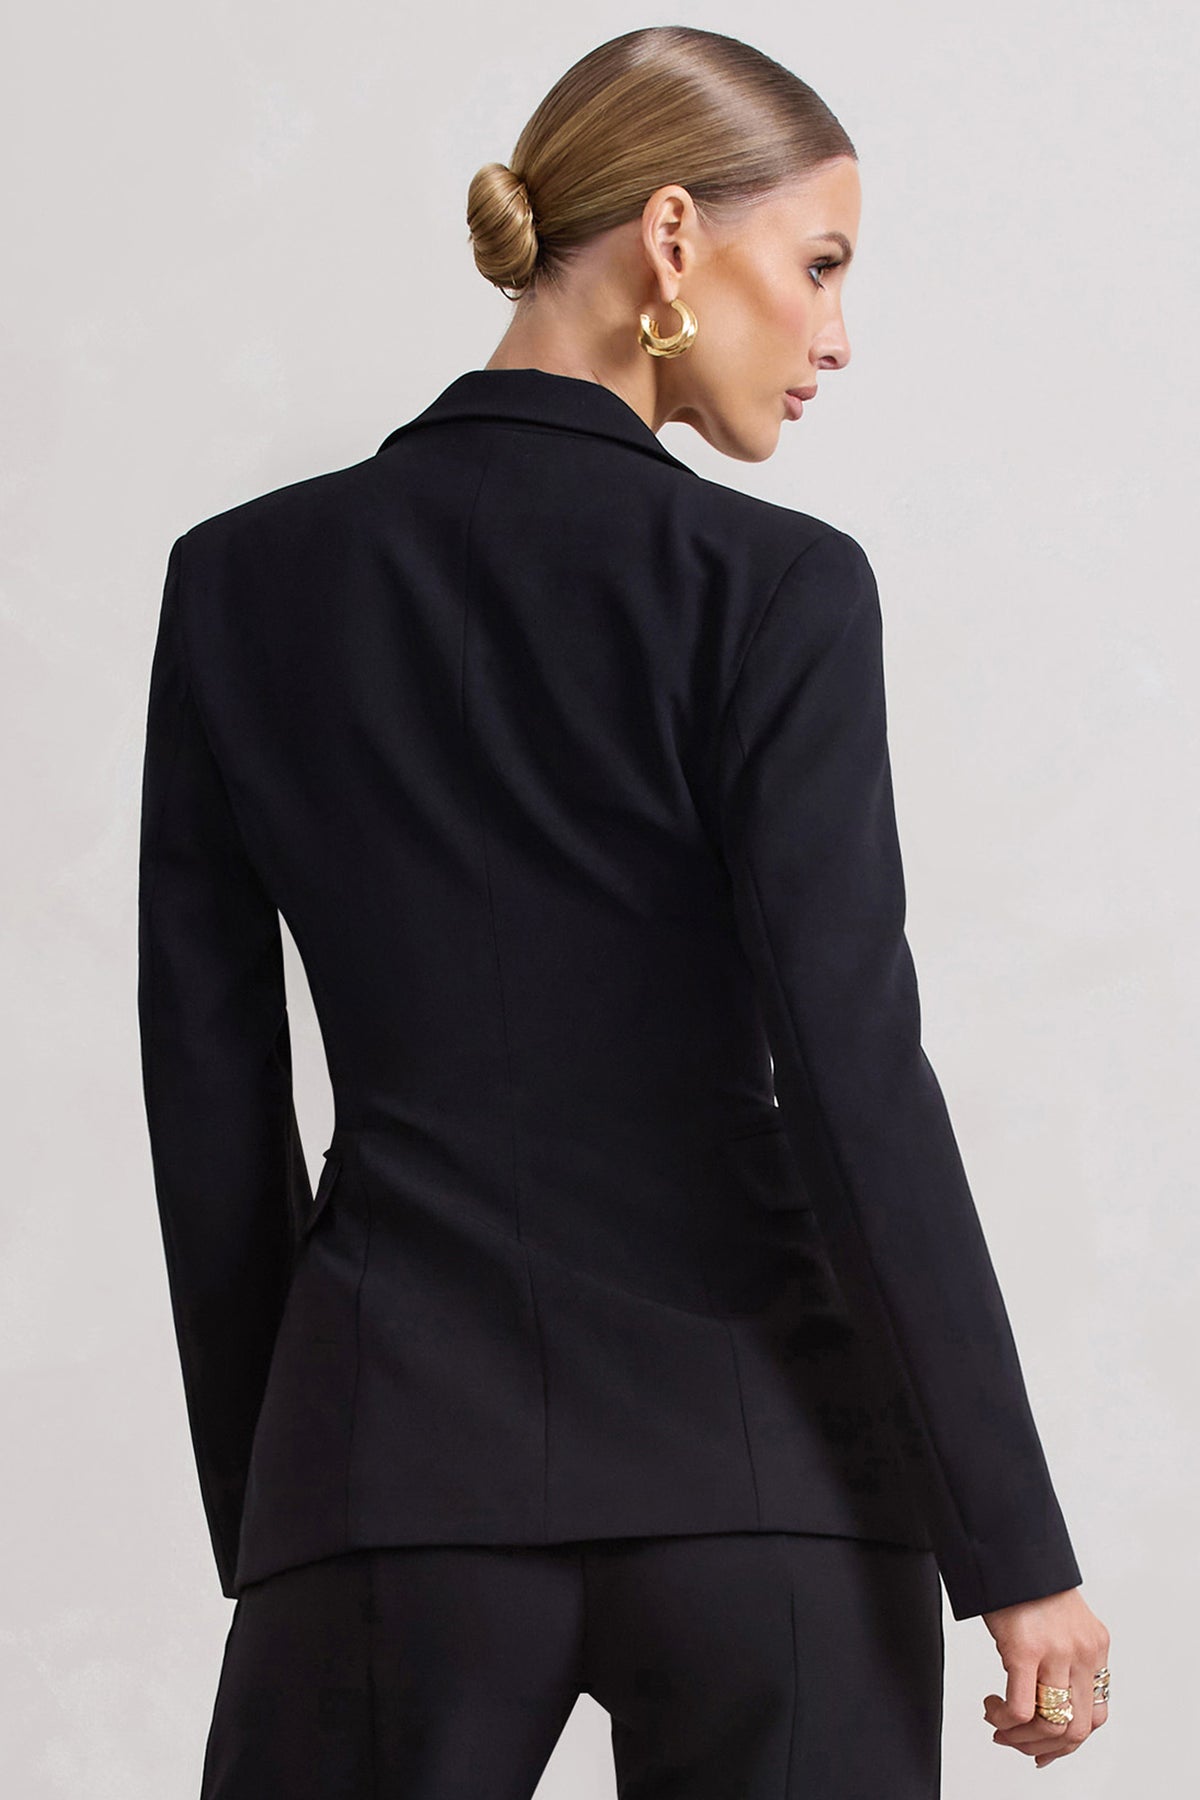 Candid Black Fitted Blazer Jacket With Zip Details – Club L London - UK